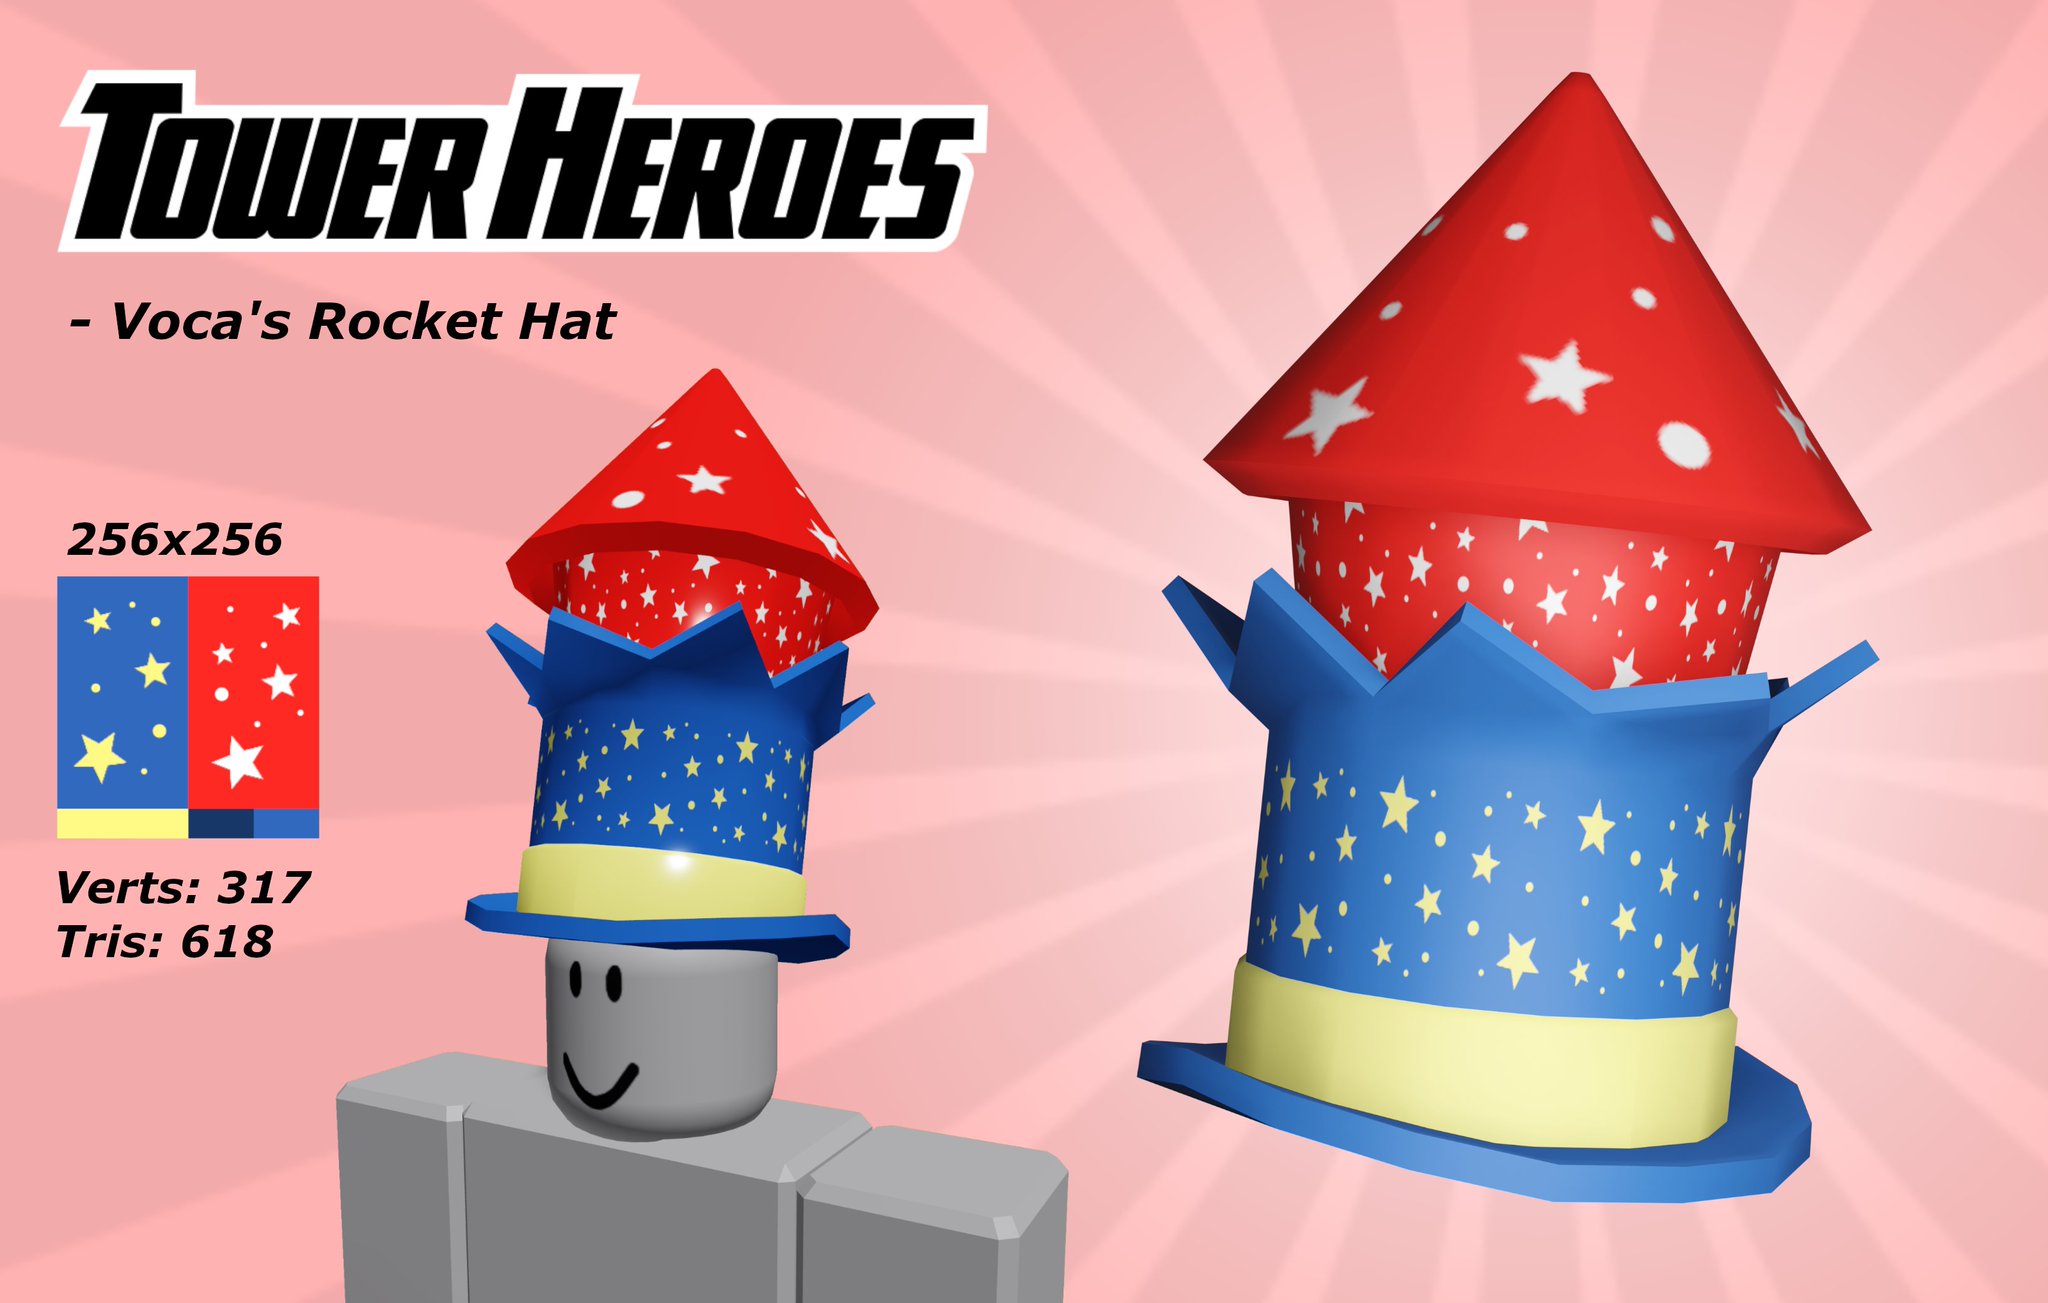 Hiloh On Twitter Here Are All Of My Tower Heroes Roblox Ugc Concepts These Were Super Fun To Make And I Might Make Some Non Tower Heroes Related Concepts In The Future